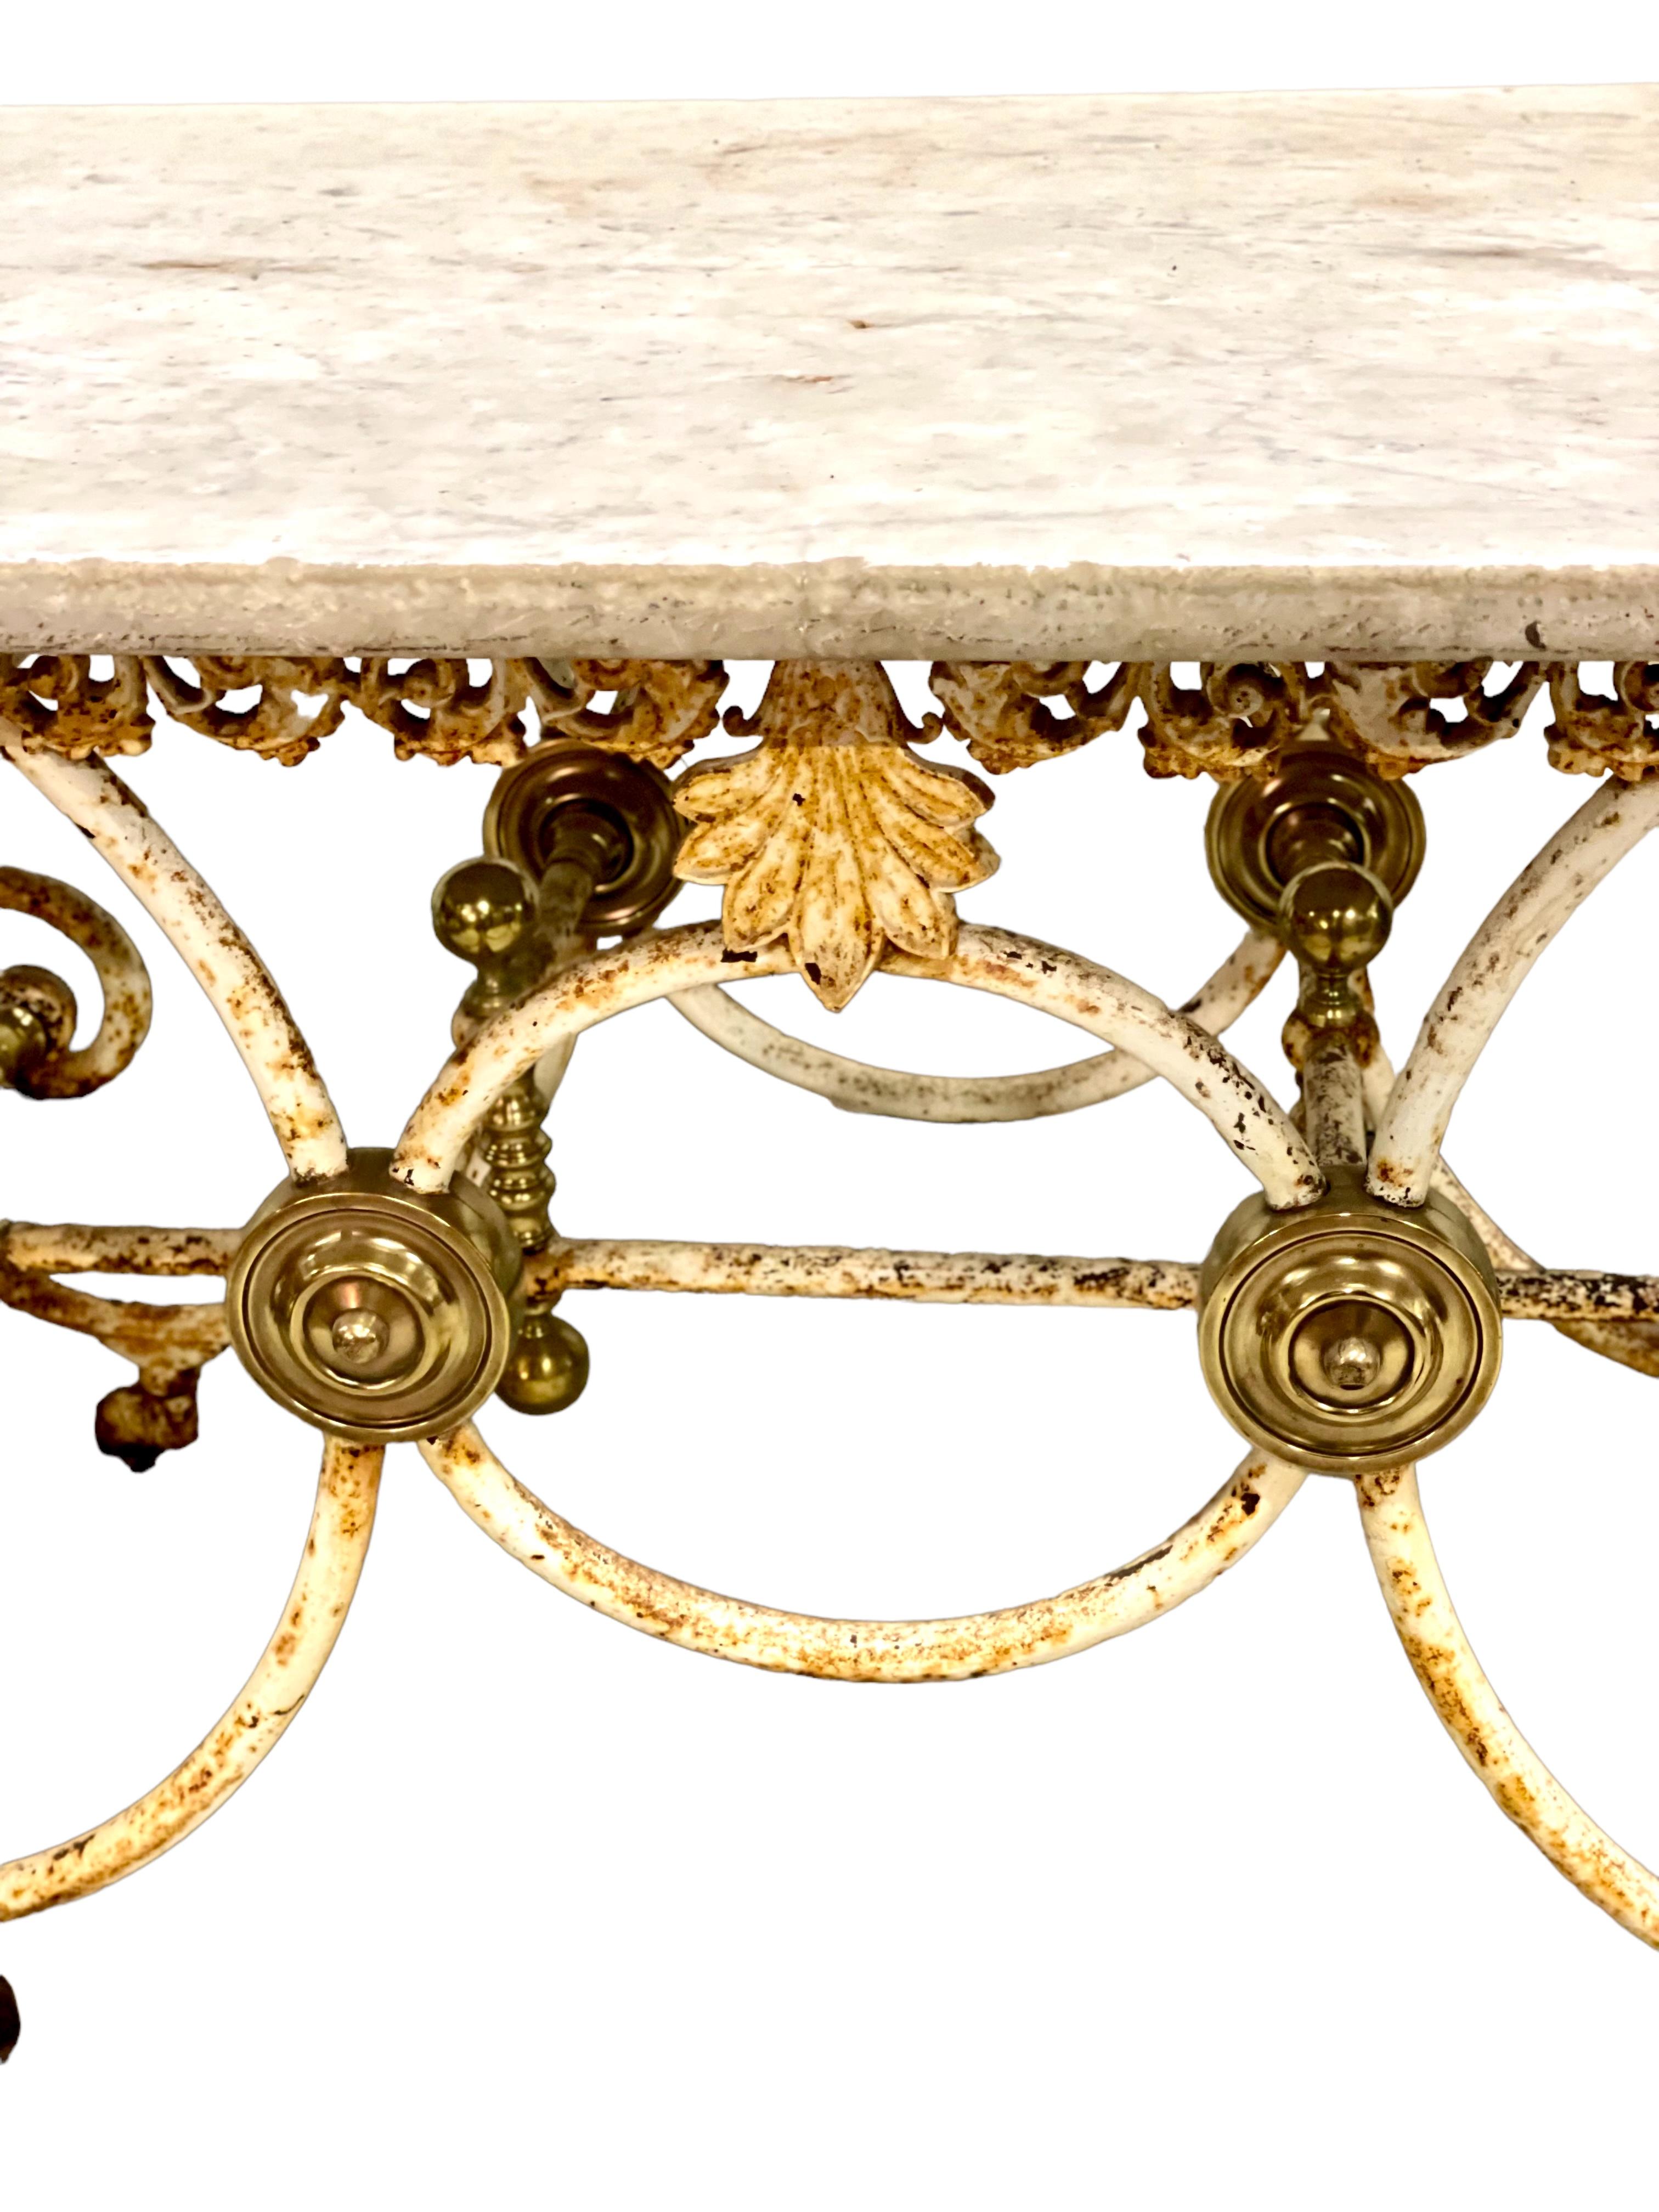 This exceptional 19th century marble-topped pastry (or butcher's) table in lacquered cast iron and gilt brass, features large C-Scroll legs with wrought iron stretchers connecting each end. The top is original marble, with a few dents and scratches